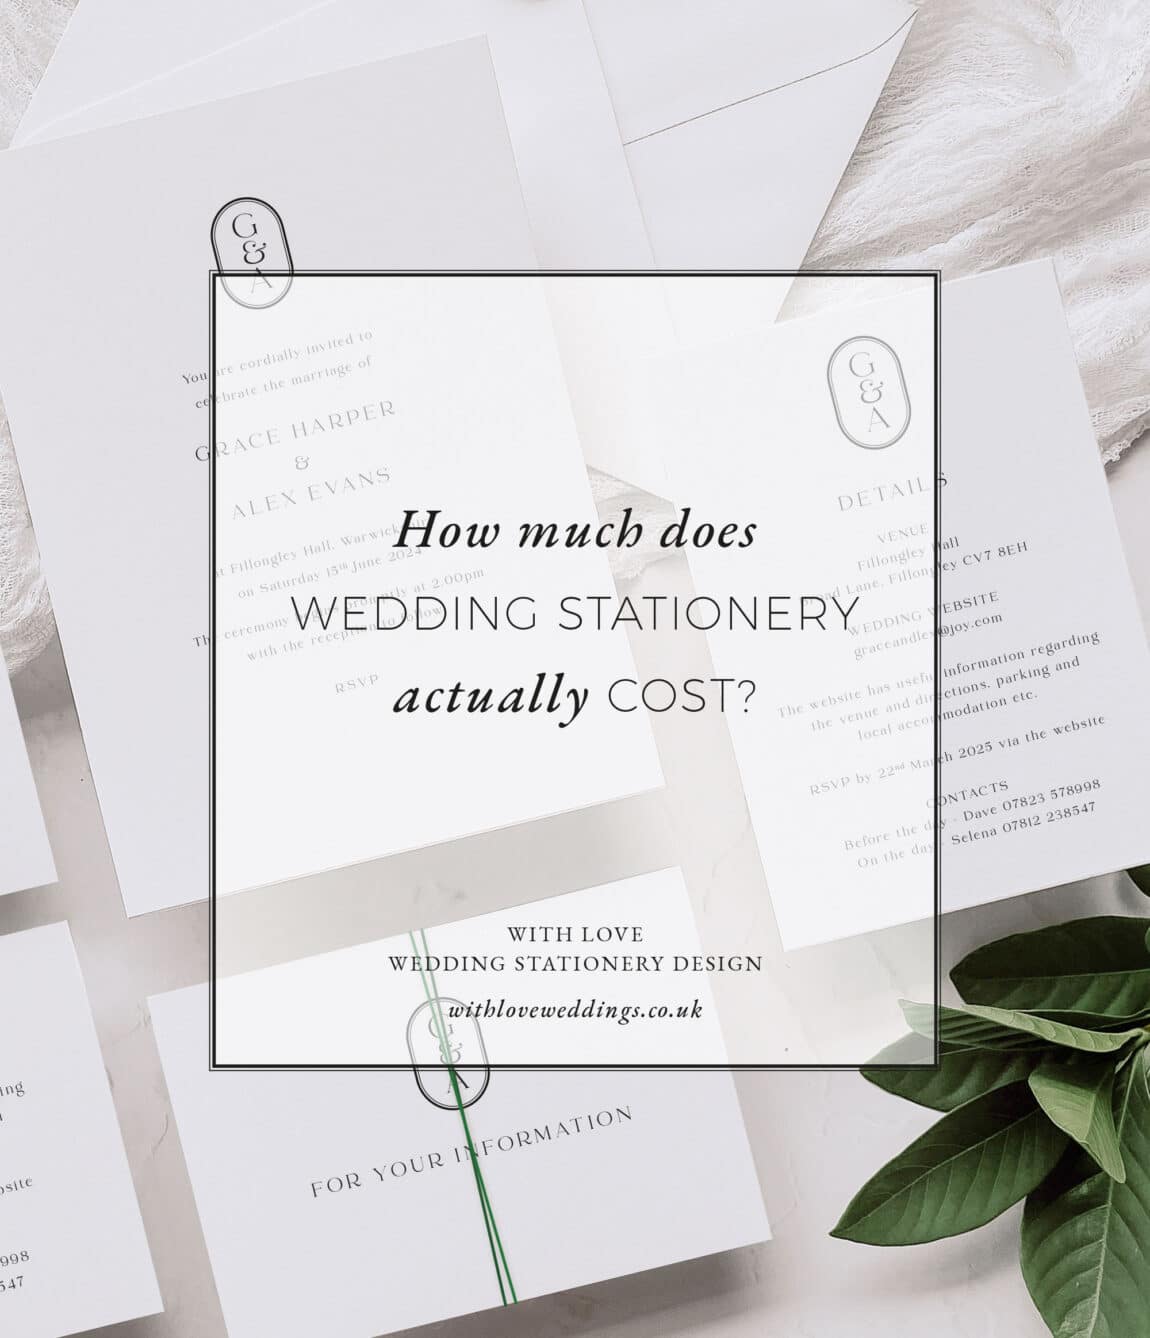 How much does wedding stationery cost in the UK